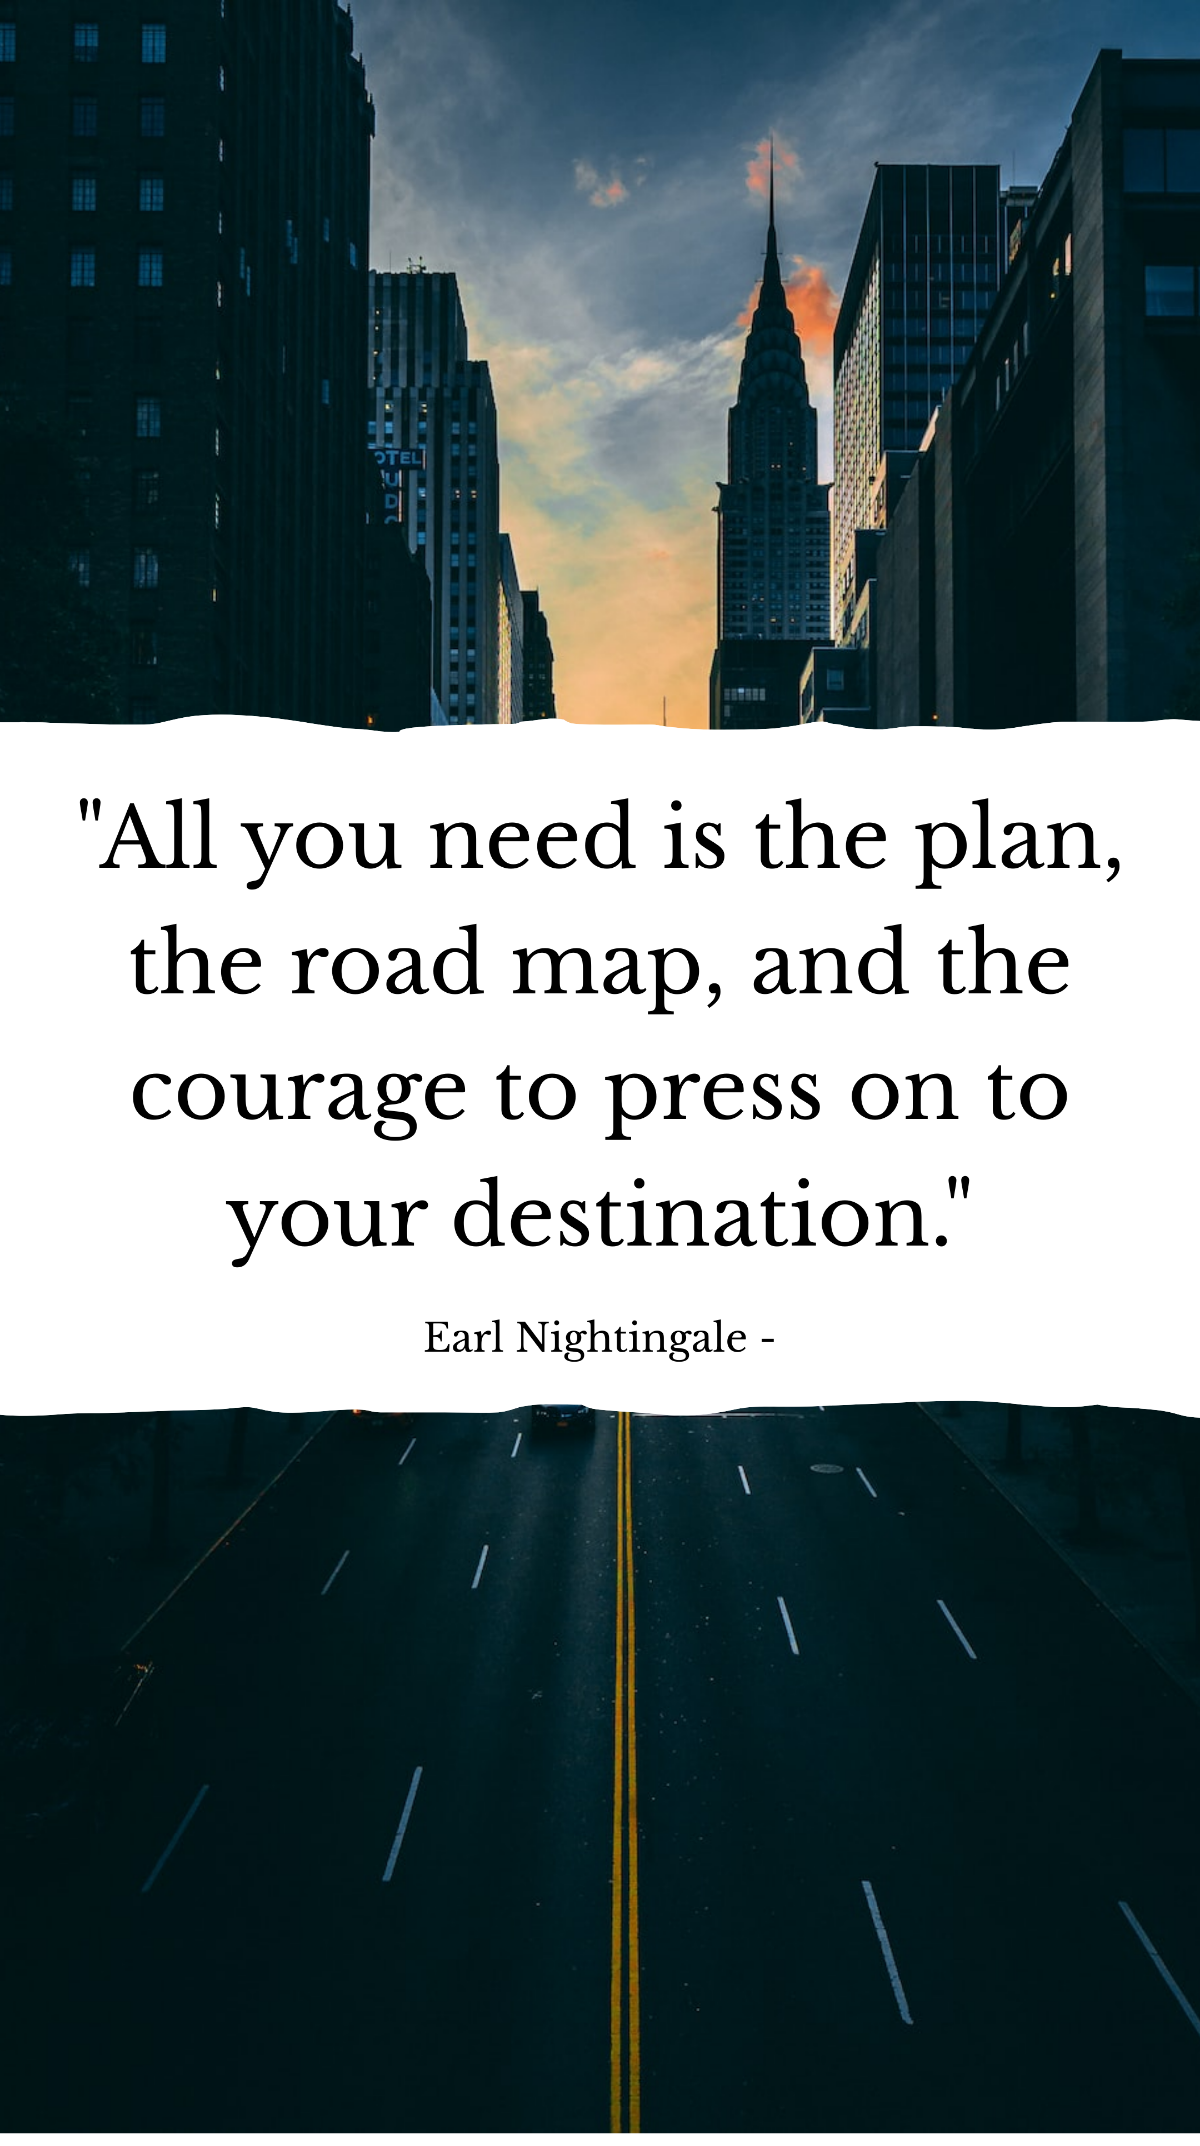 Earl Nightingale - All you need is the plan, the road map, and the courage to press on to your destination. Template